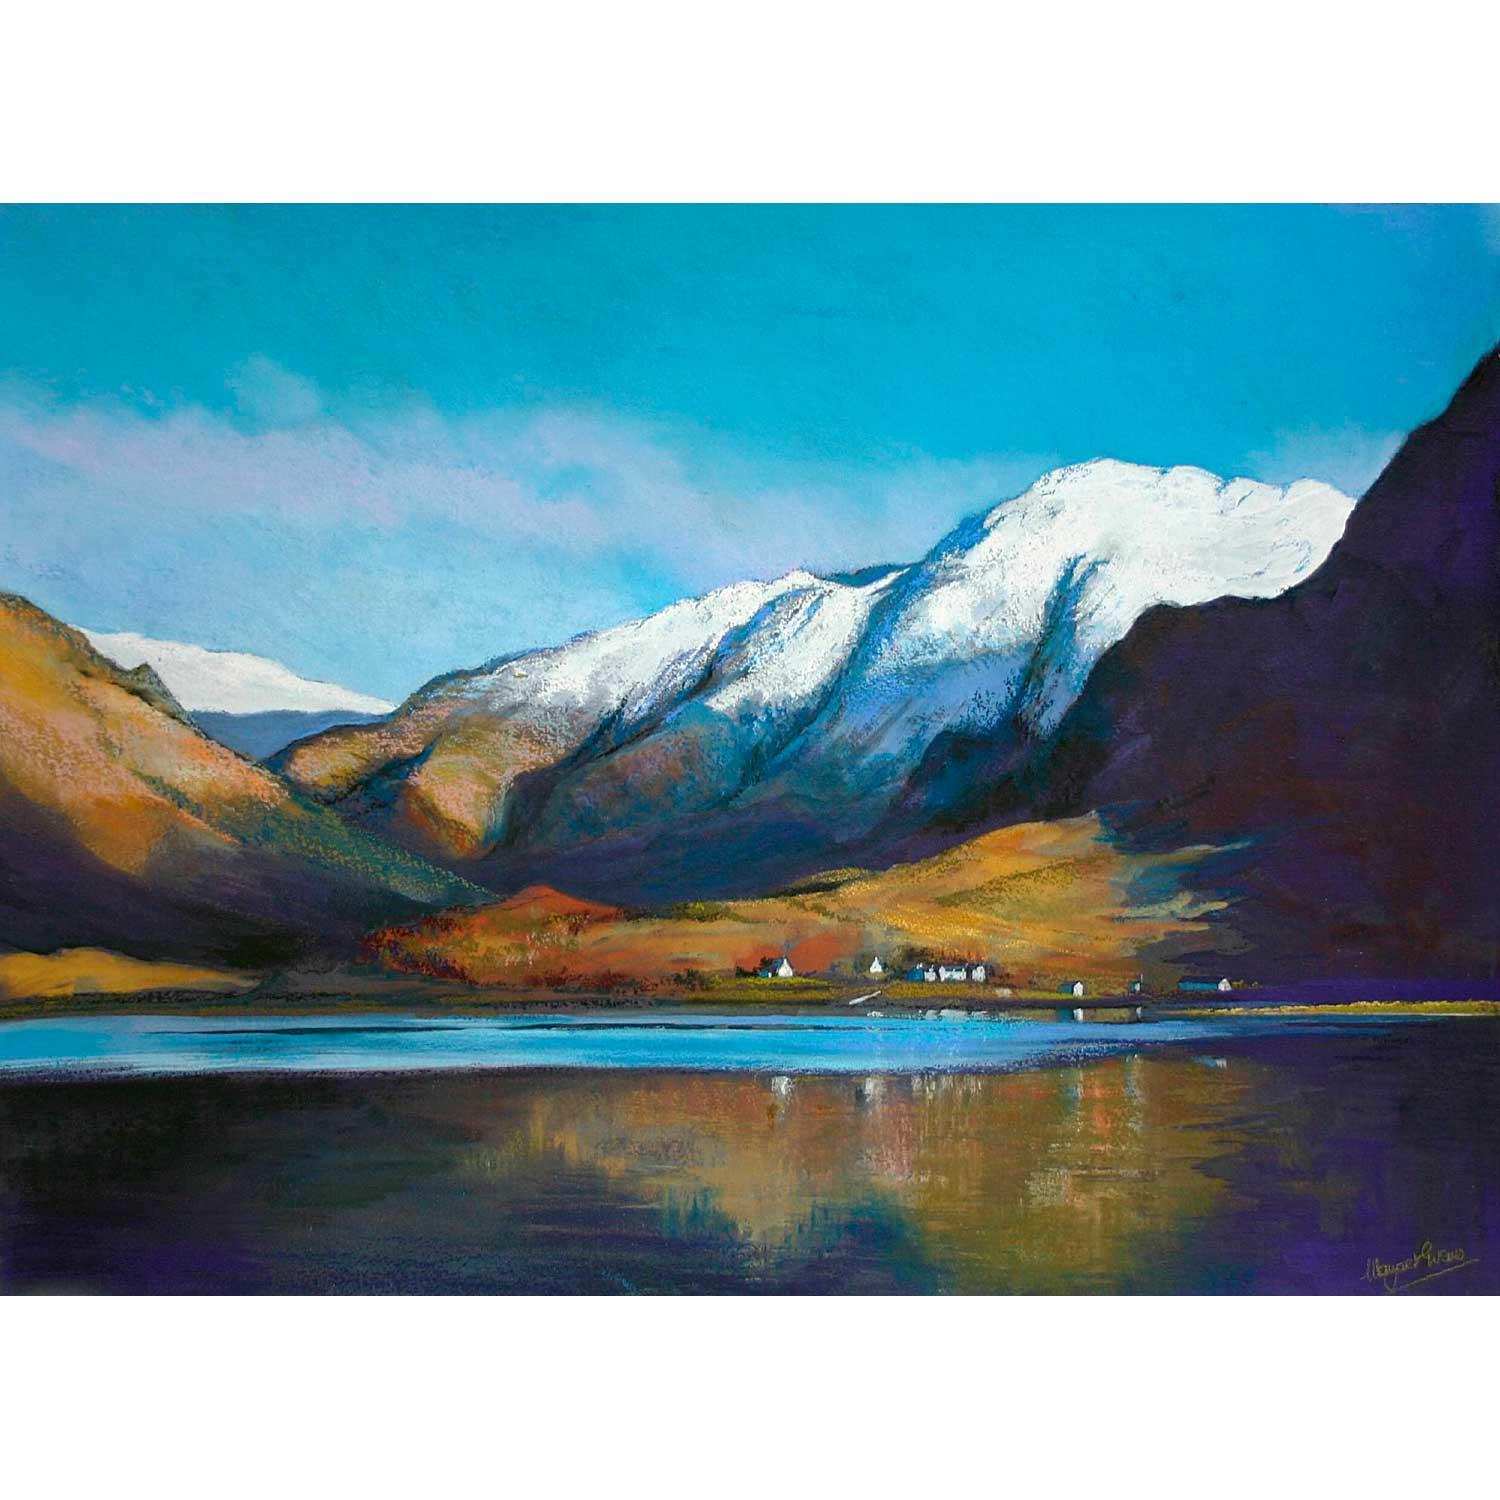 Sisters at Kintail  by Margaret Evans